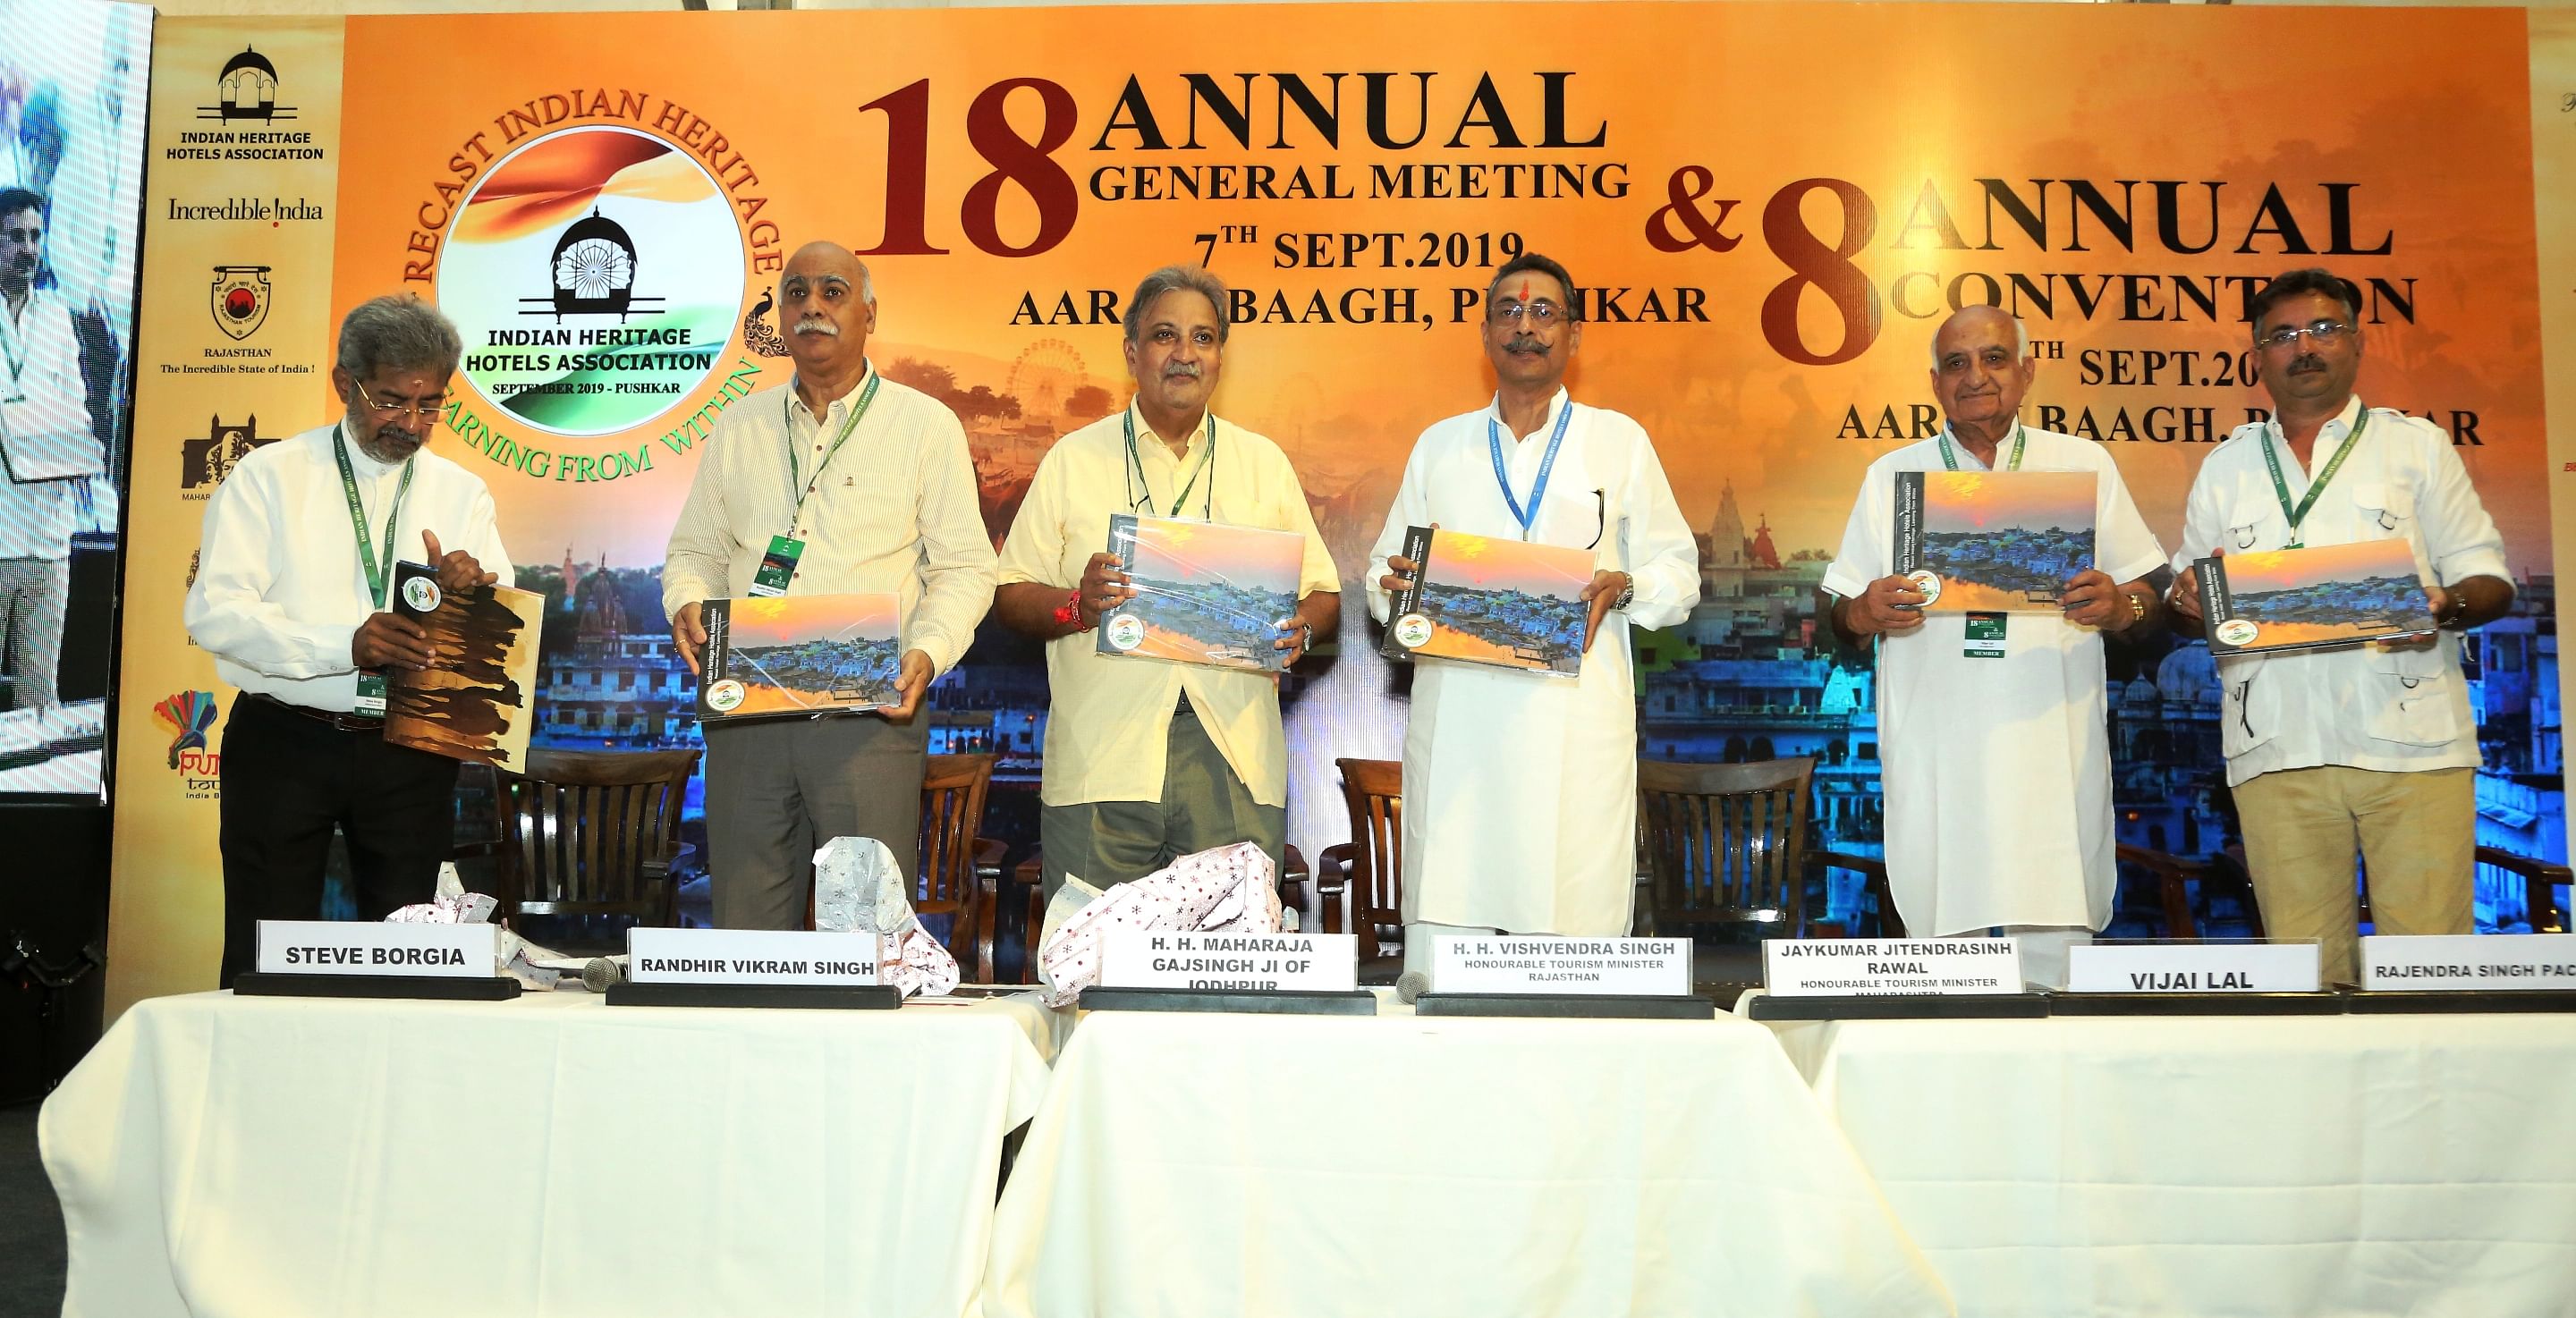 Release of the 5th edition of Coffee Table book of the IHHA at the 8th Annual Convention of the Indian Heritage Hotels Association (IHHA) held at Hotel Aaram Baagh in Pushkar today. DH Photo